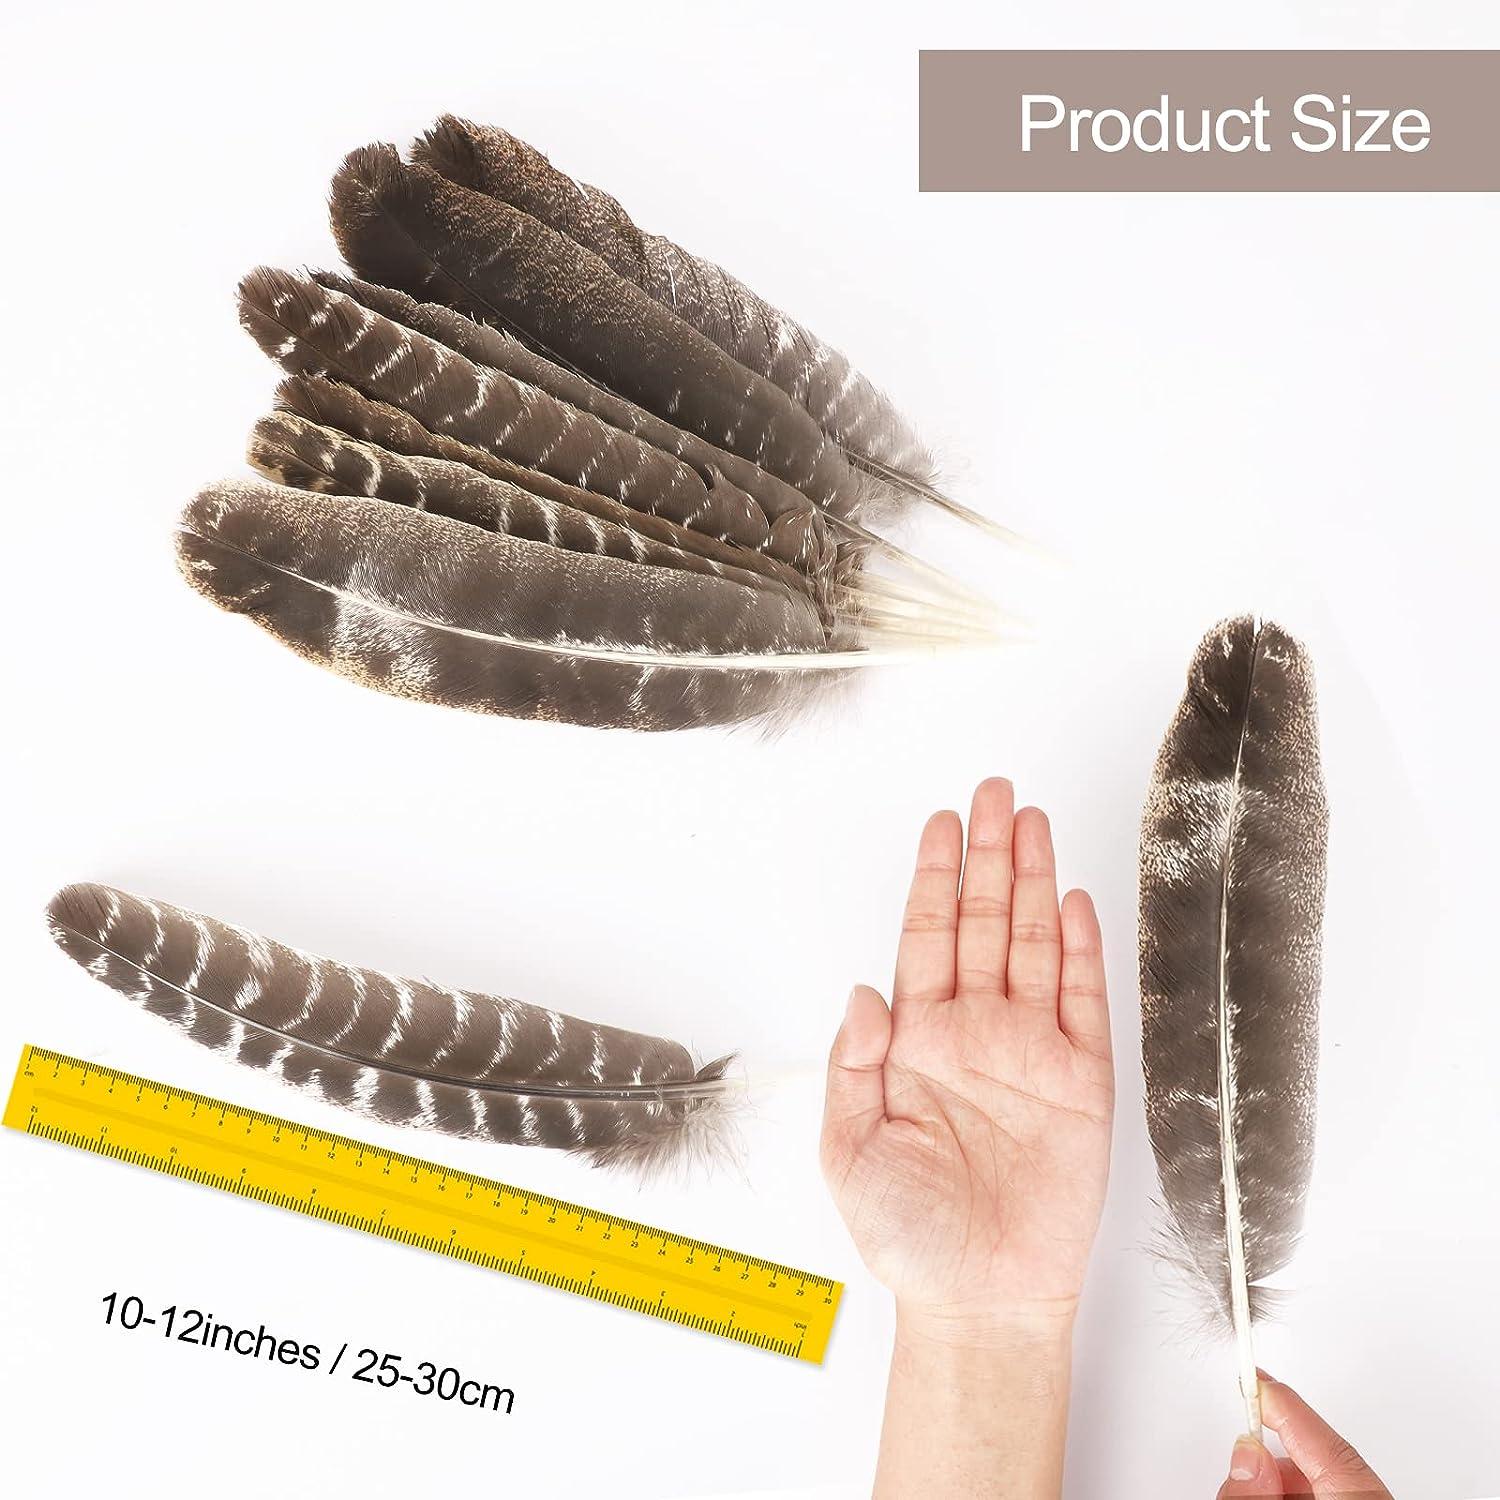  Zamplinka 5 Pcs Natural Turkey Feathers for Crafts DIY  Decoration Collection Tails Feathers 10-12 inches : Arts, Crafts & Sewing